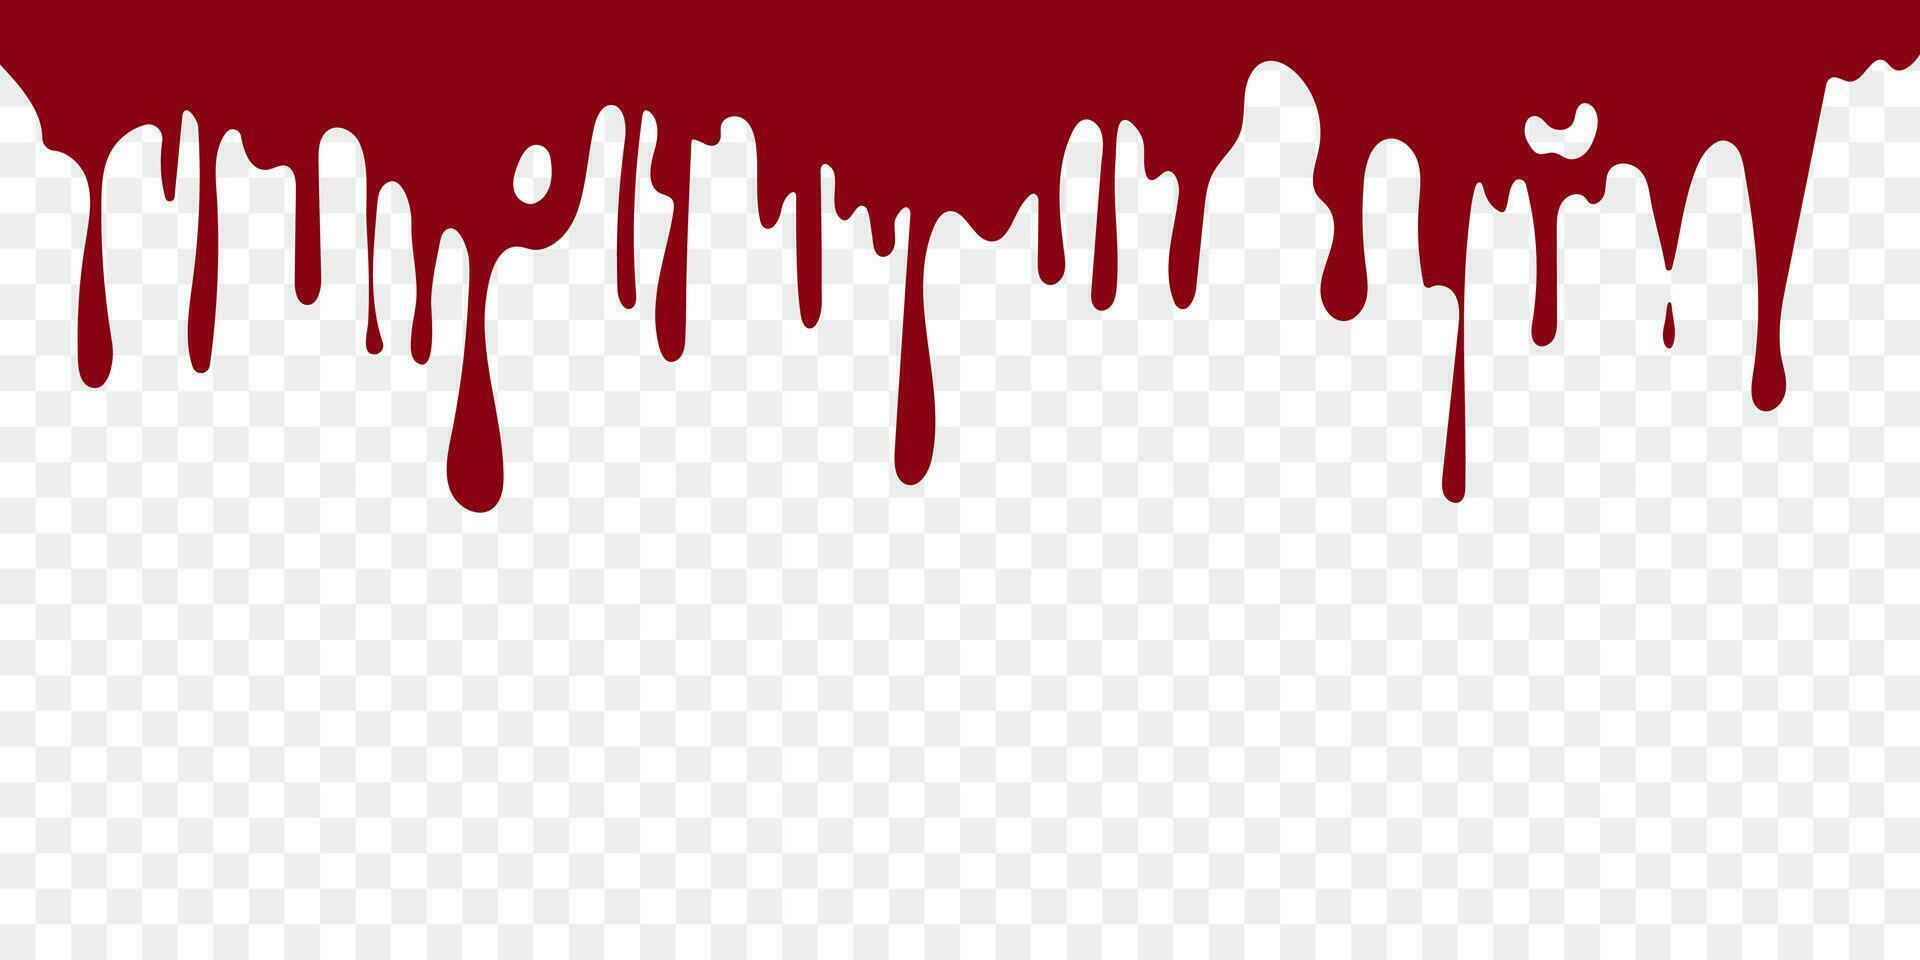 Dripping blood vector illustration. Current inks, flowing liquid, stencil drops, paint splatter, molten blood. Seamless vector on transparent background.